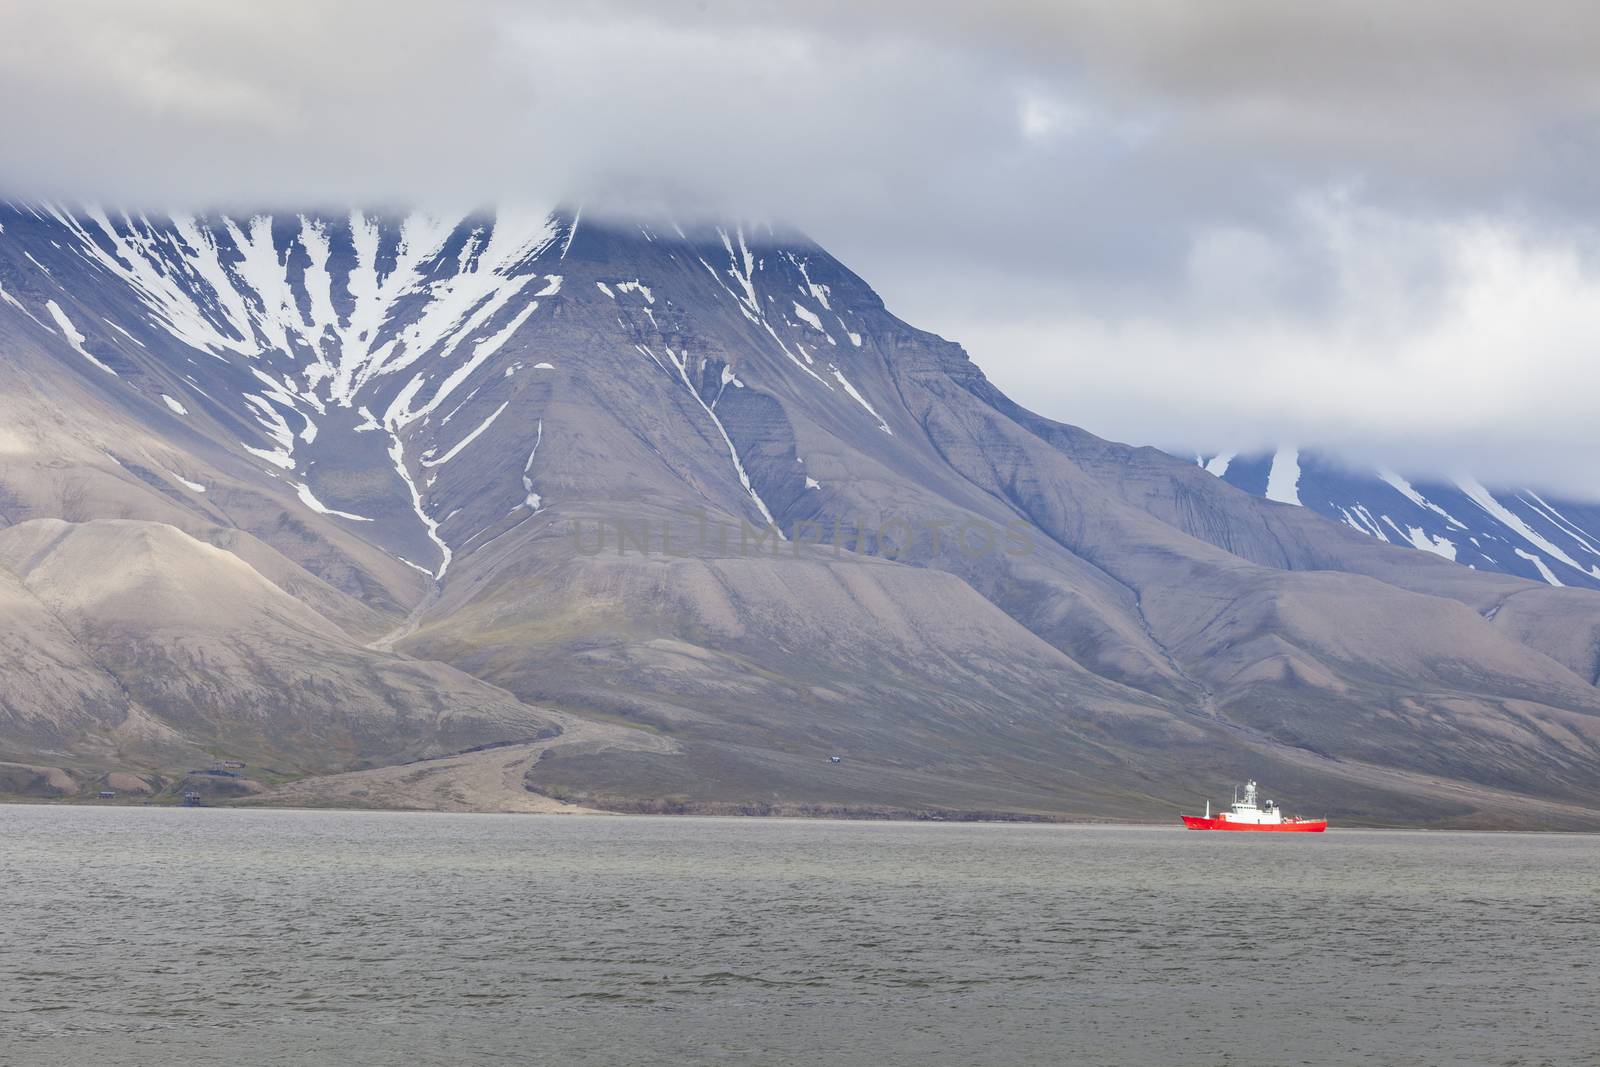 Beautiful scenic view with norge cruise boat docked at Longyearbyen port against the background of fogged black mountain and calm water of Advent Bay, Spitsbergen (Svalbard), Norway, Greenland sea

